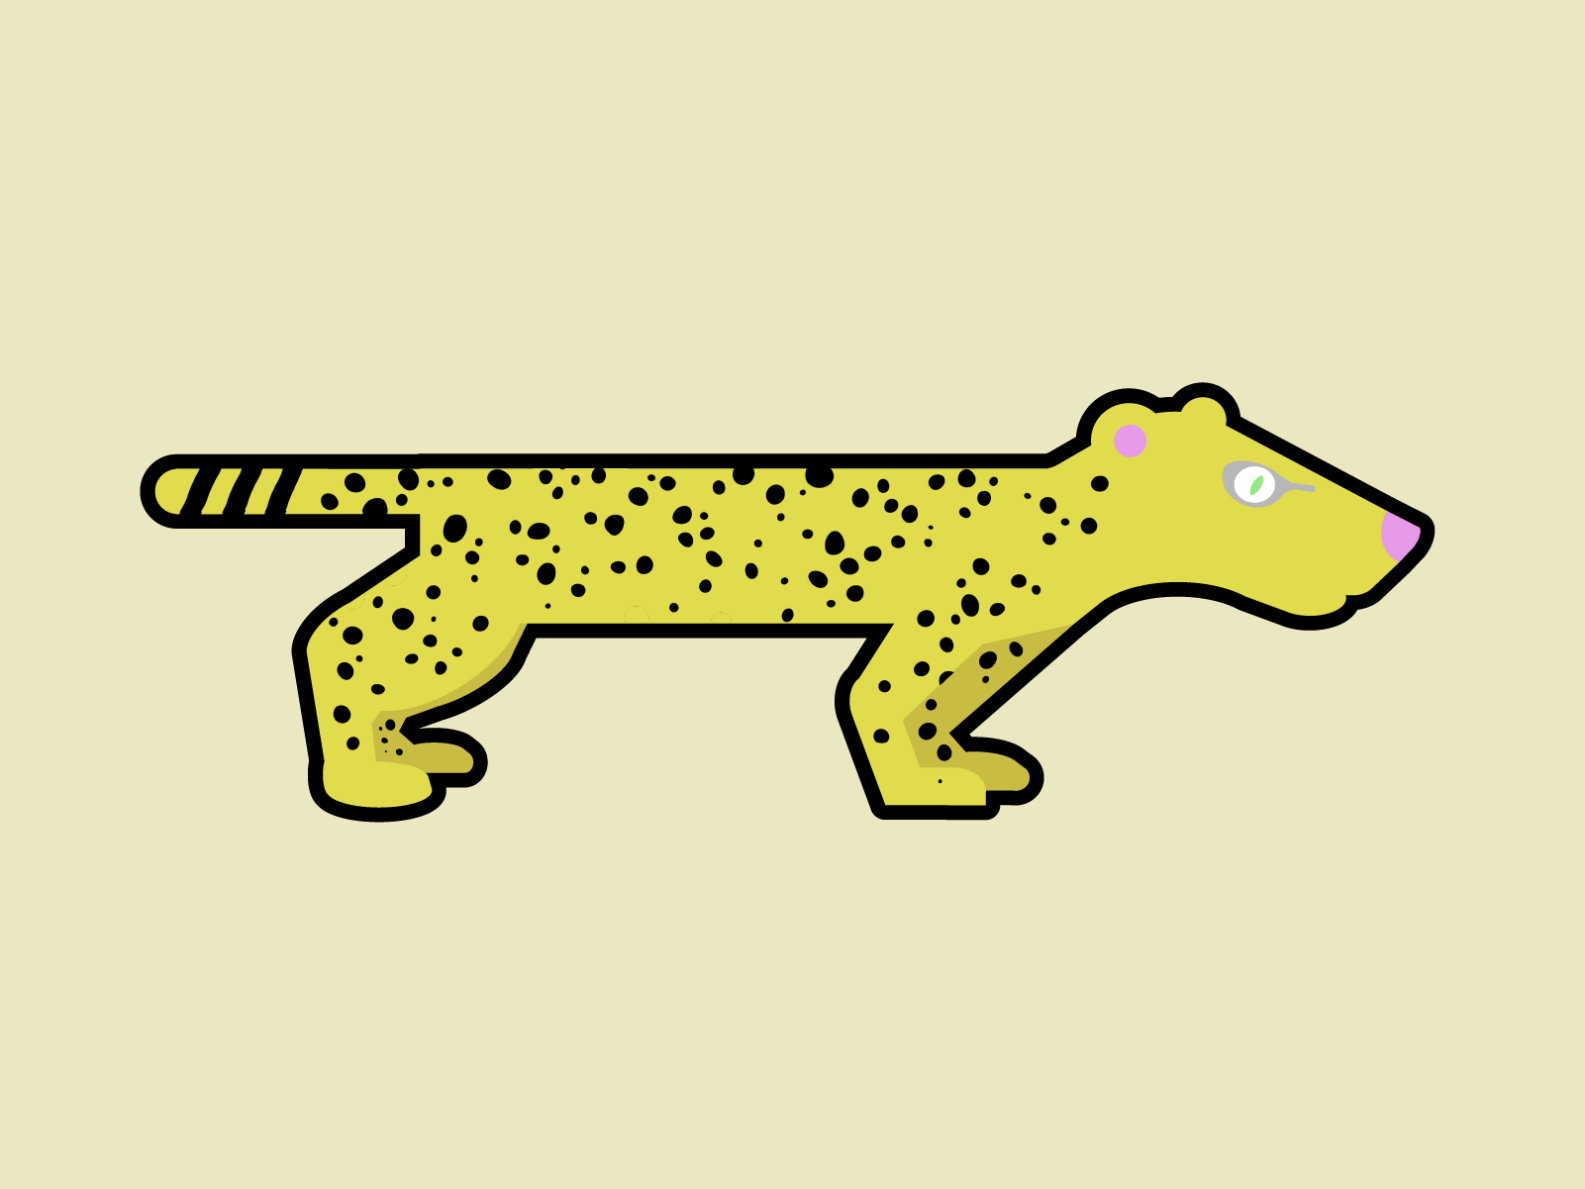 Cheetah Video Game Character by Spencer La Buda on Dribbble